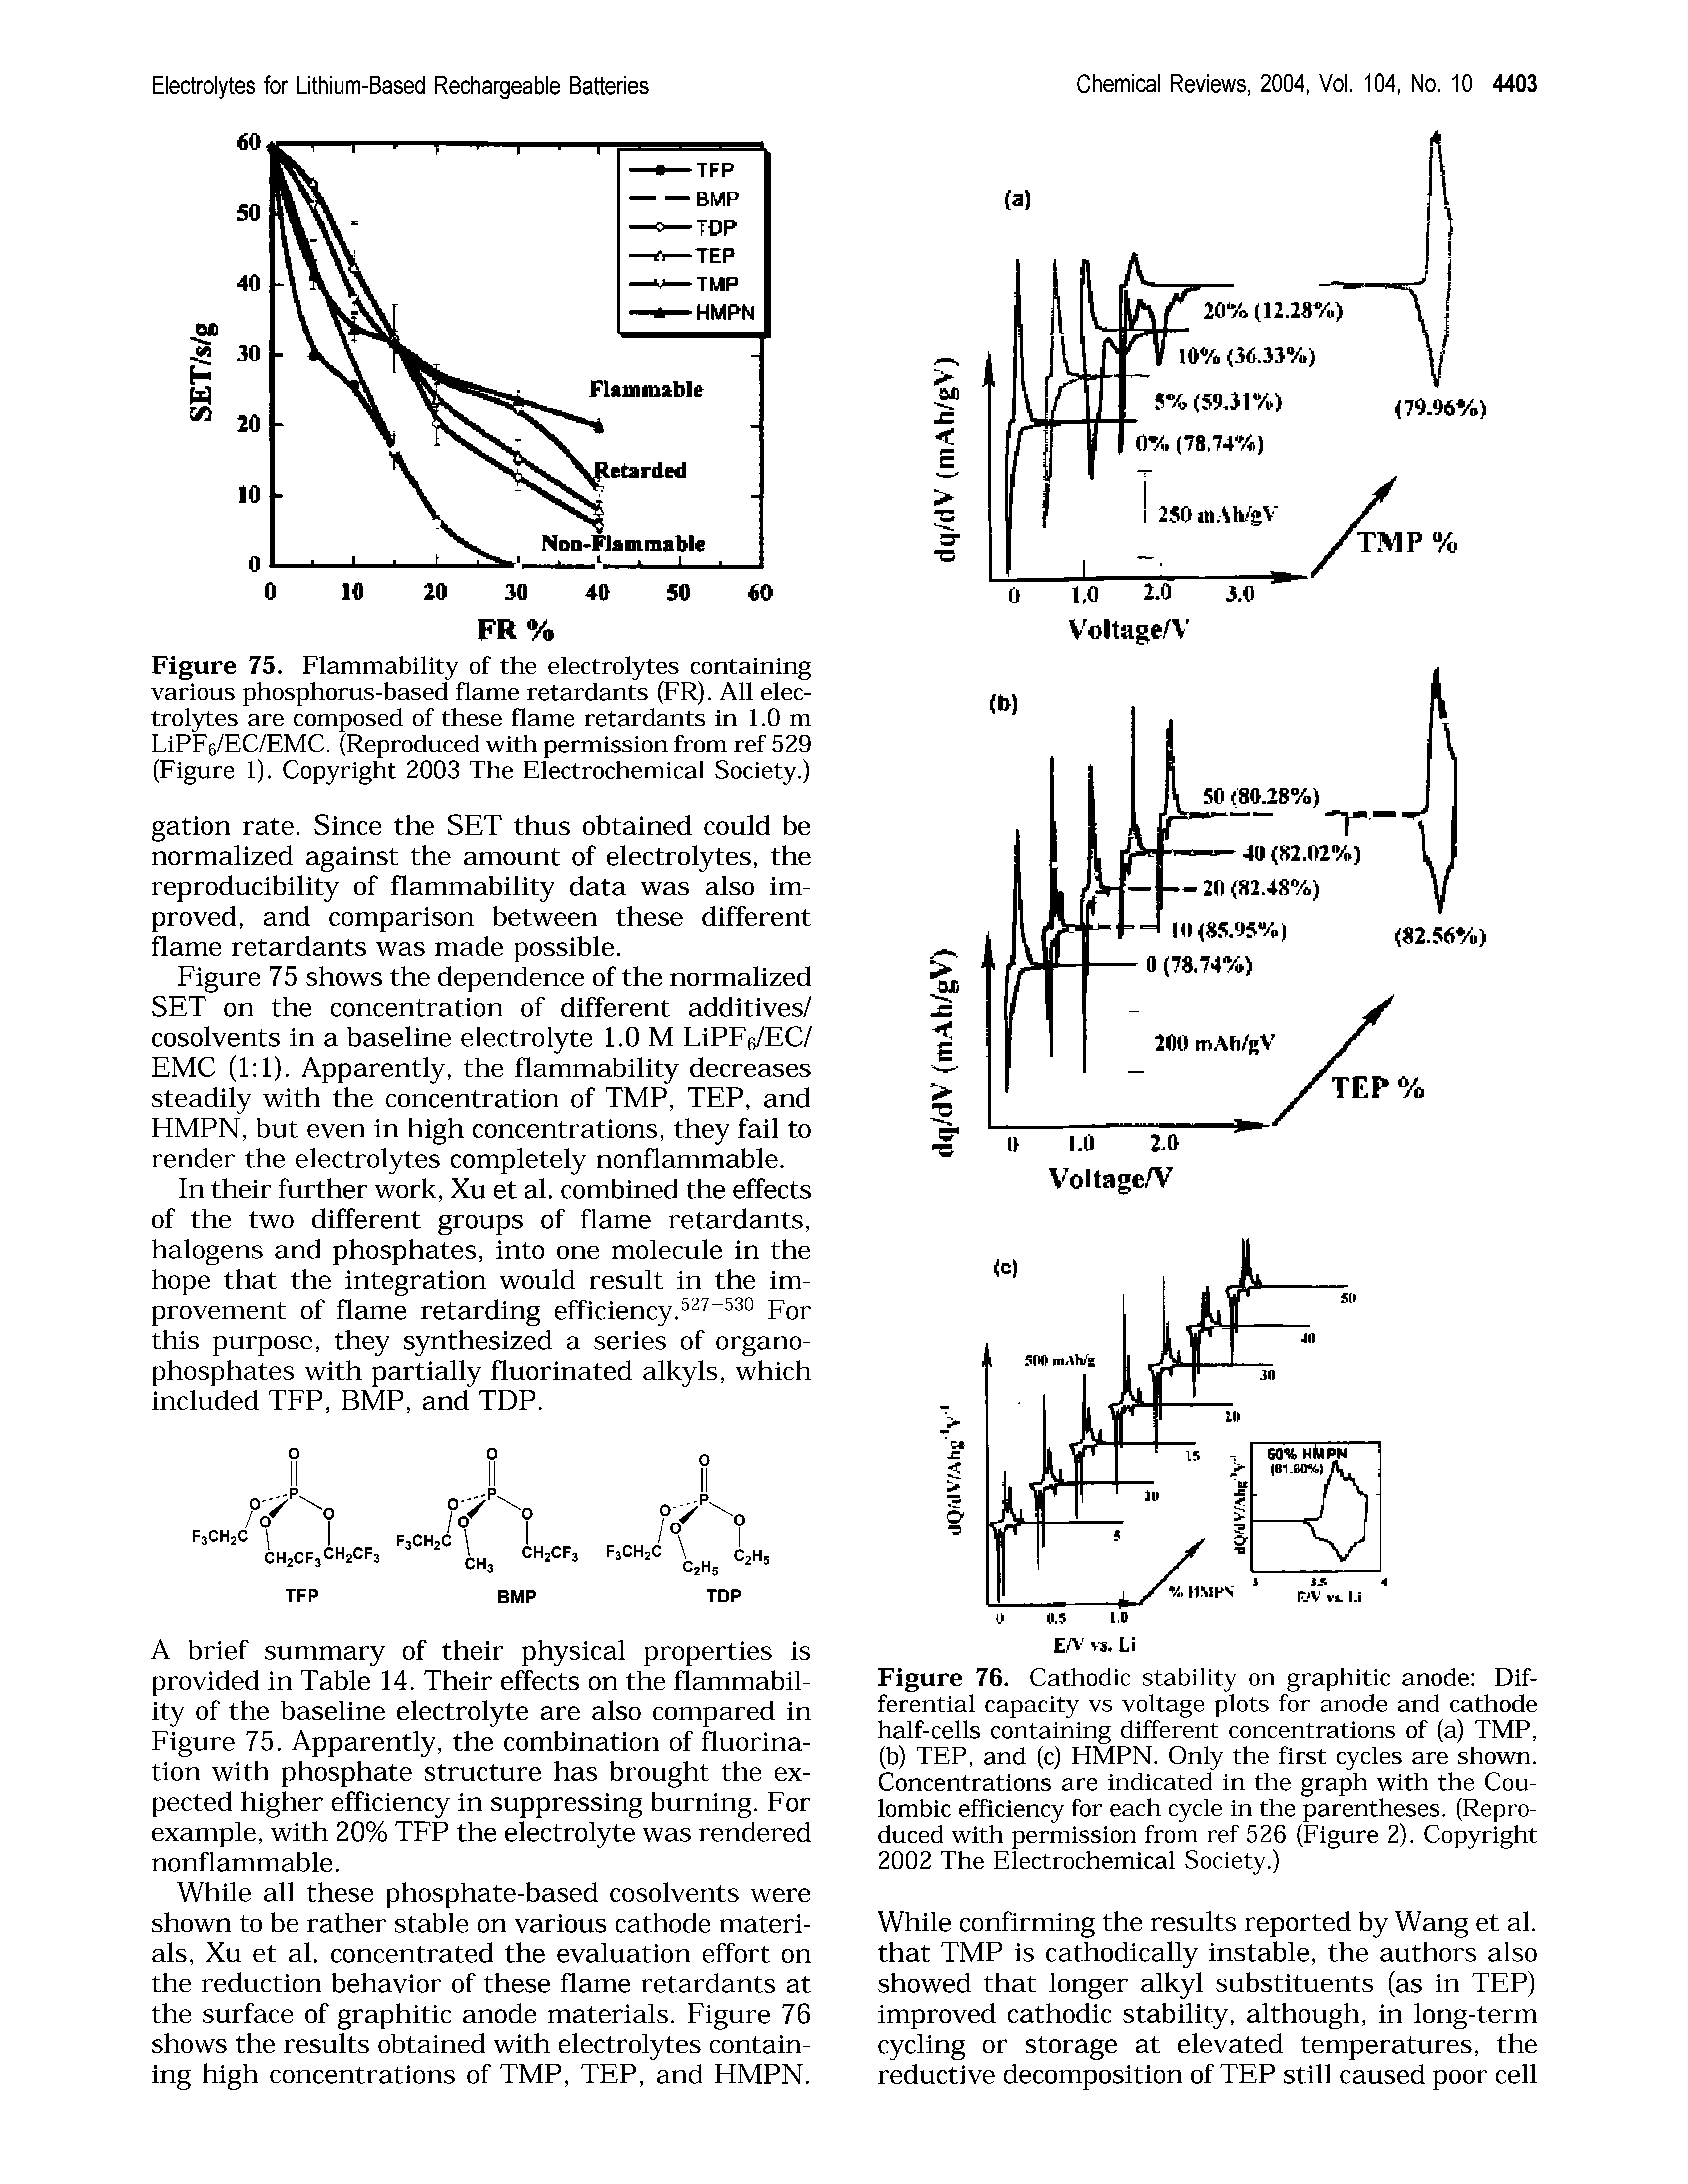 Figure 75. Flammability of the electrolytes containing various phosphorus-based flame retardants (FR). All electrolytes are composed of these flame retardants in 1.0 m LiPFe/EC/EMC. (Reproduced with permission from ref 529 (Eigure 1). Copyright 2003 The Electrochemical Society.)...